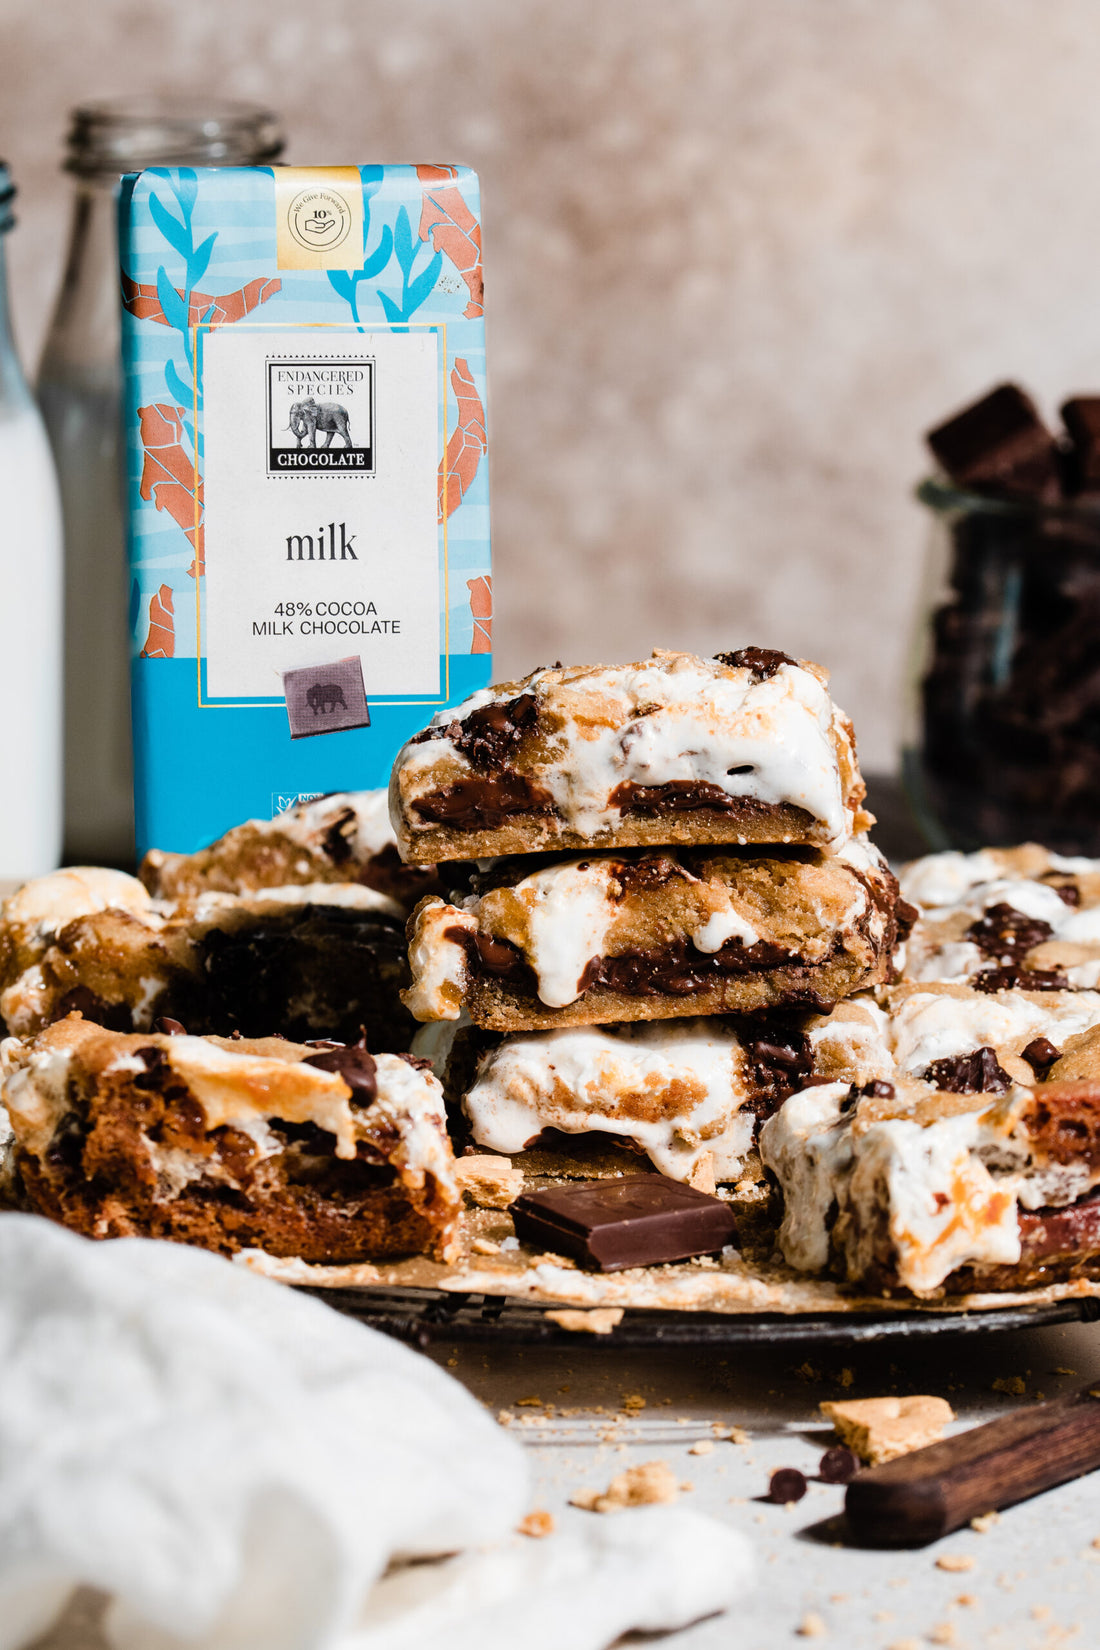 Caramel S'mores Bars by Endangered Species Chocolate